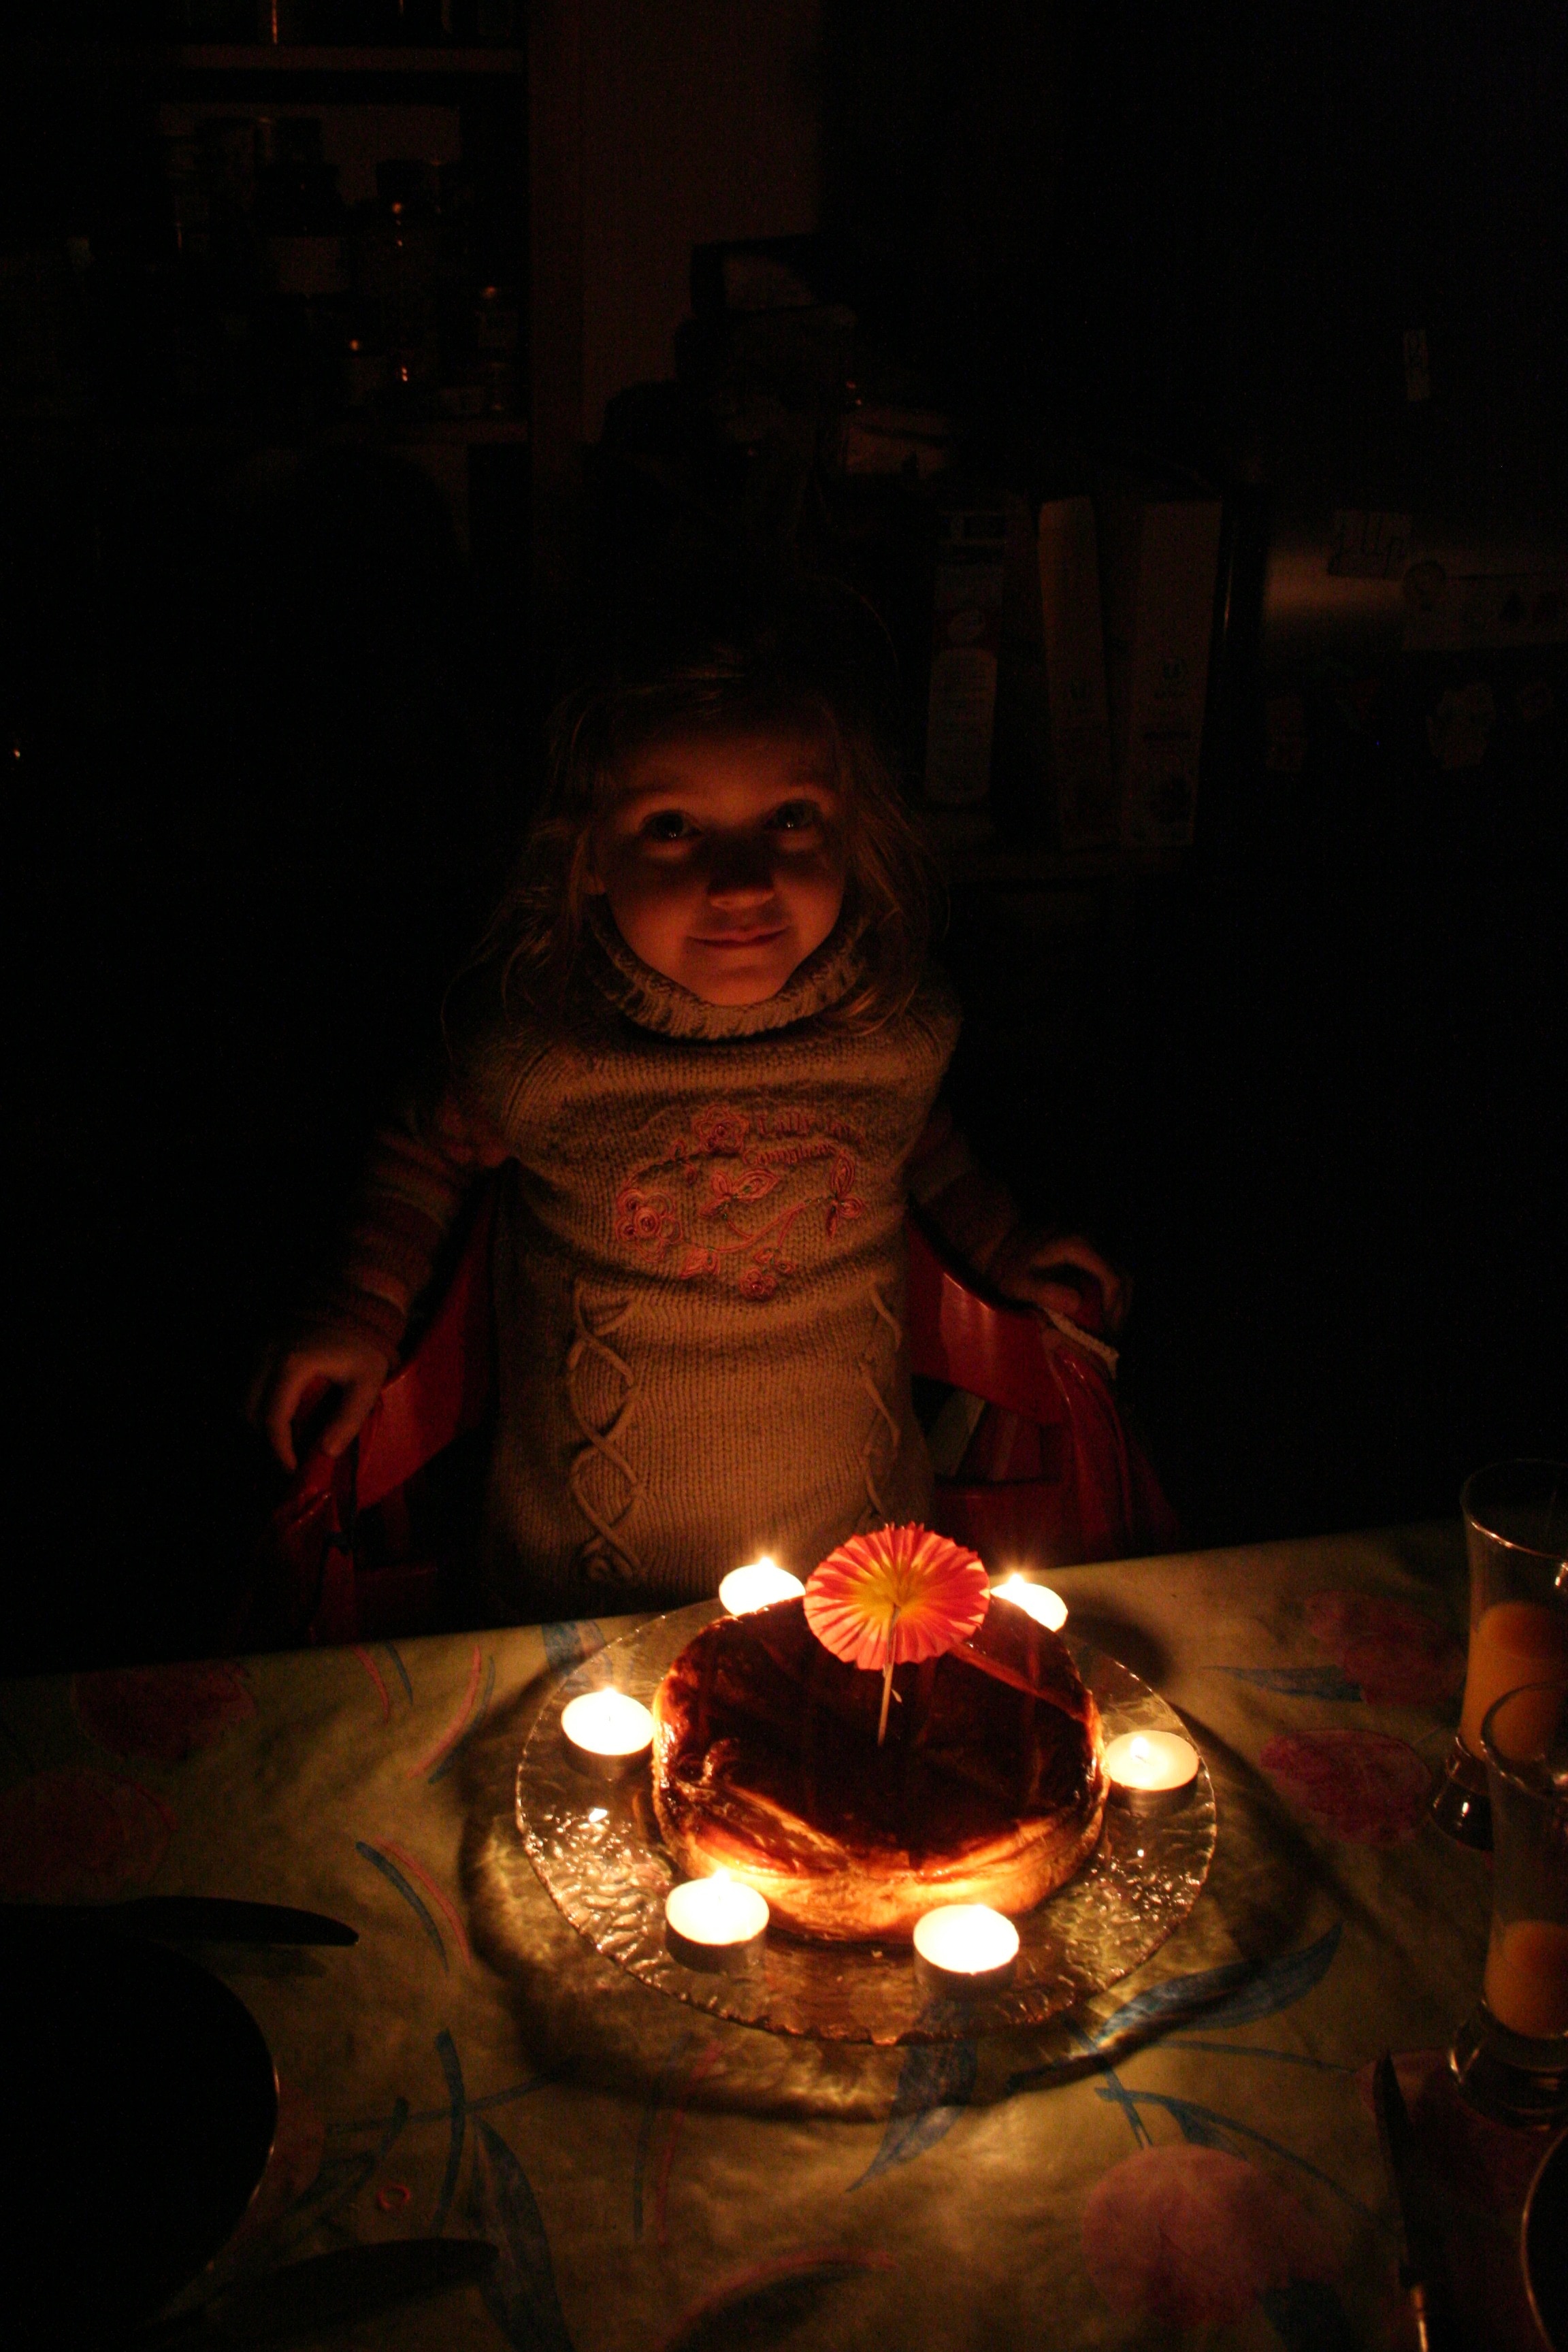 Flame, Candle, Birthday, table, dark